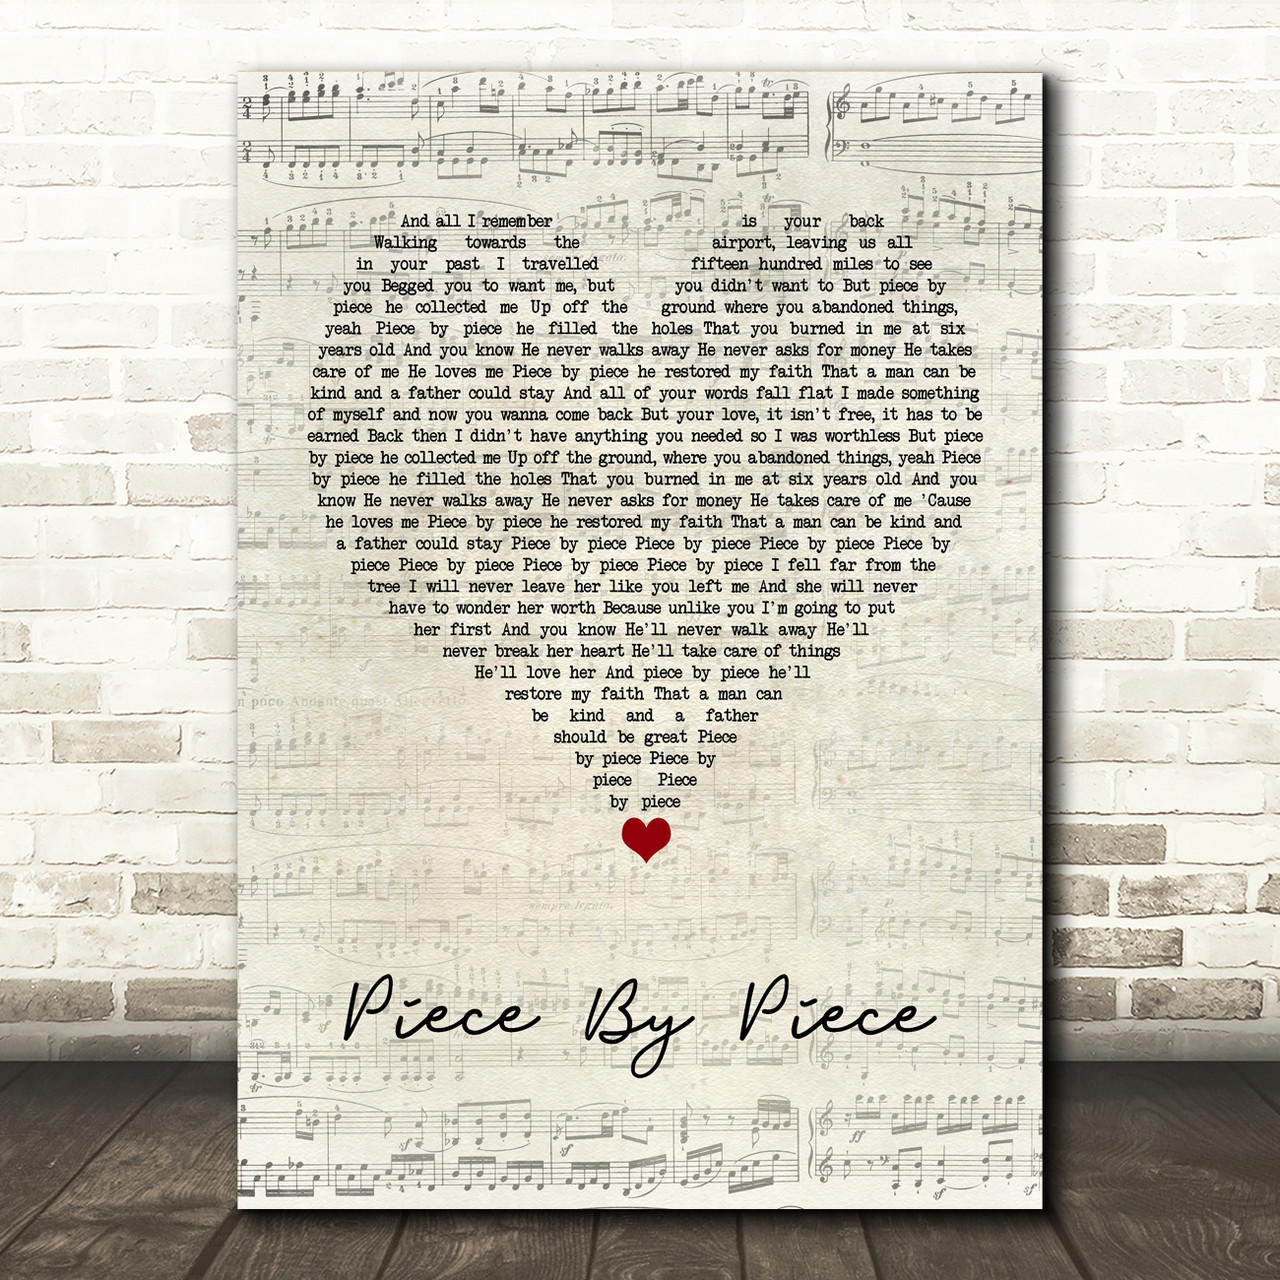 Kelly Clarkson - Piece By Piece  Great song lyrics, Favorite